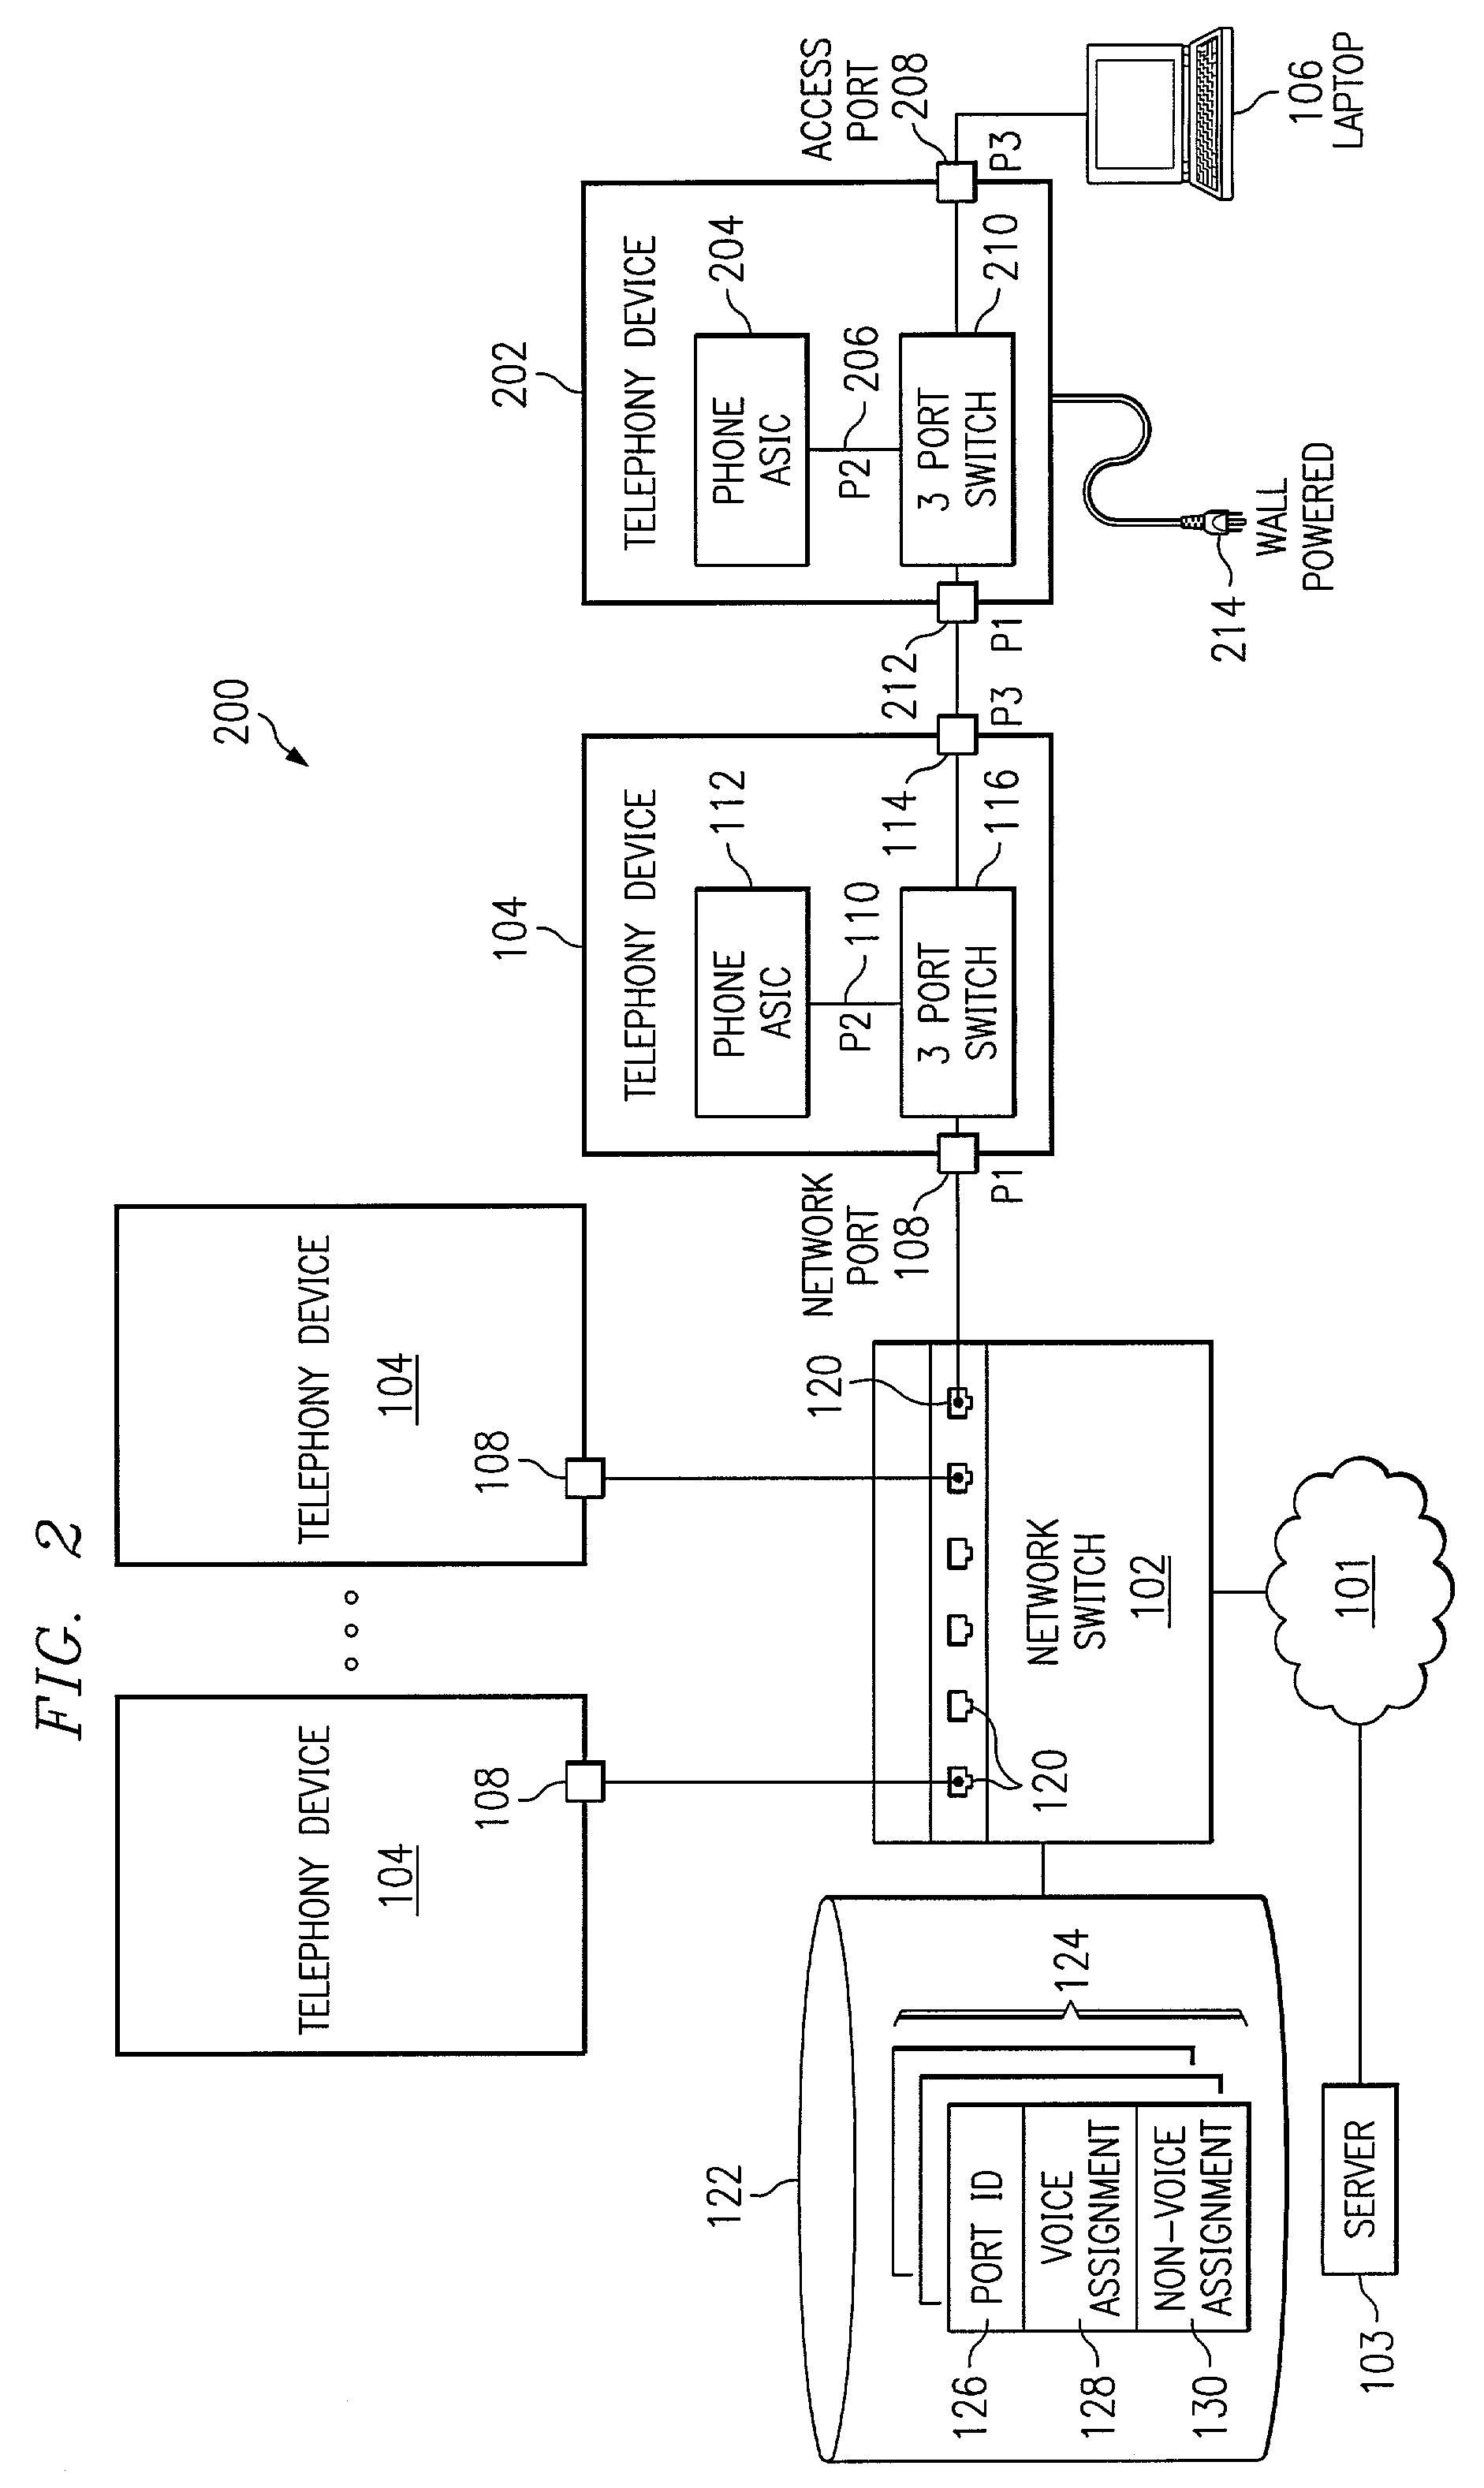 Method for regulating power for voice over Internet Protocol telephones